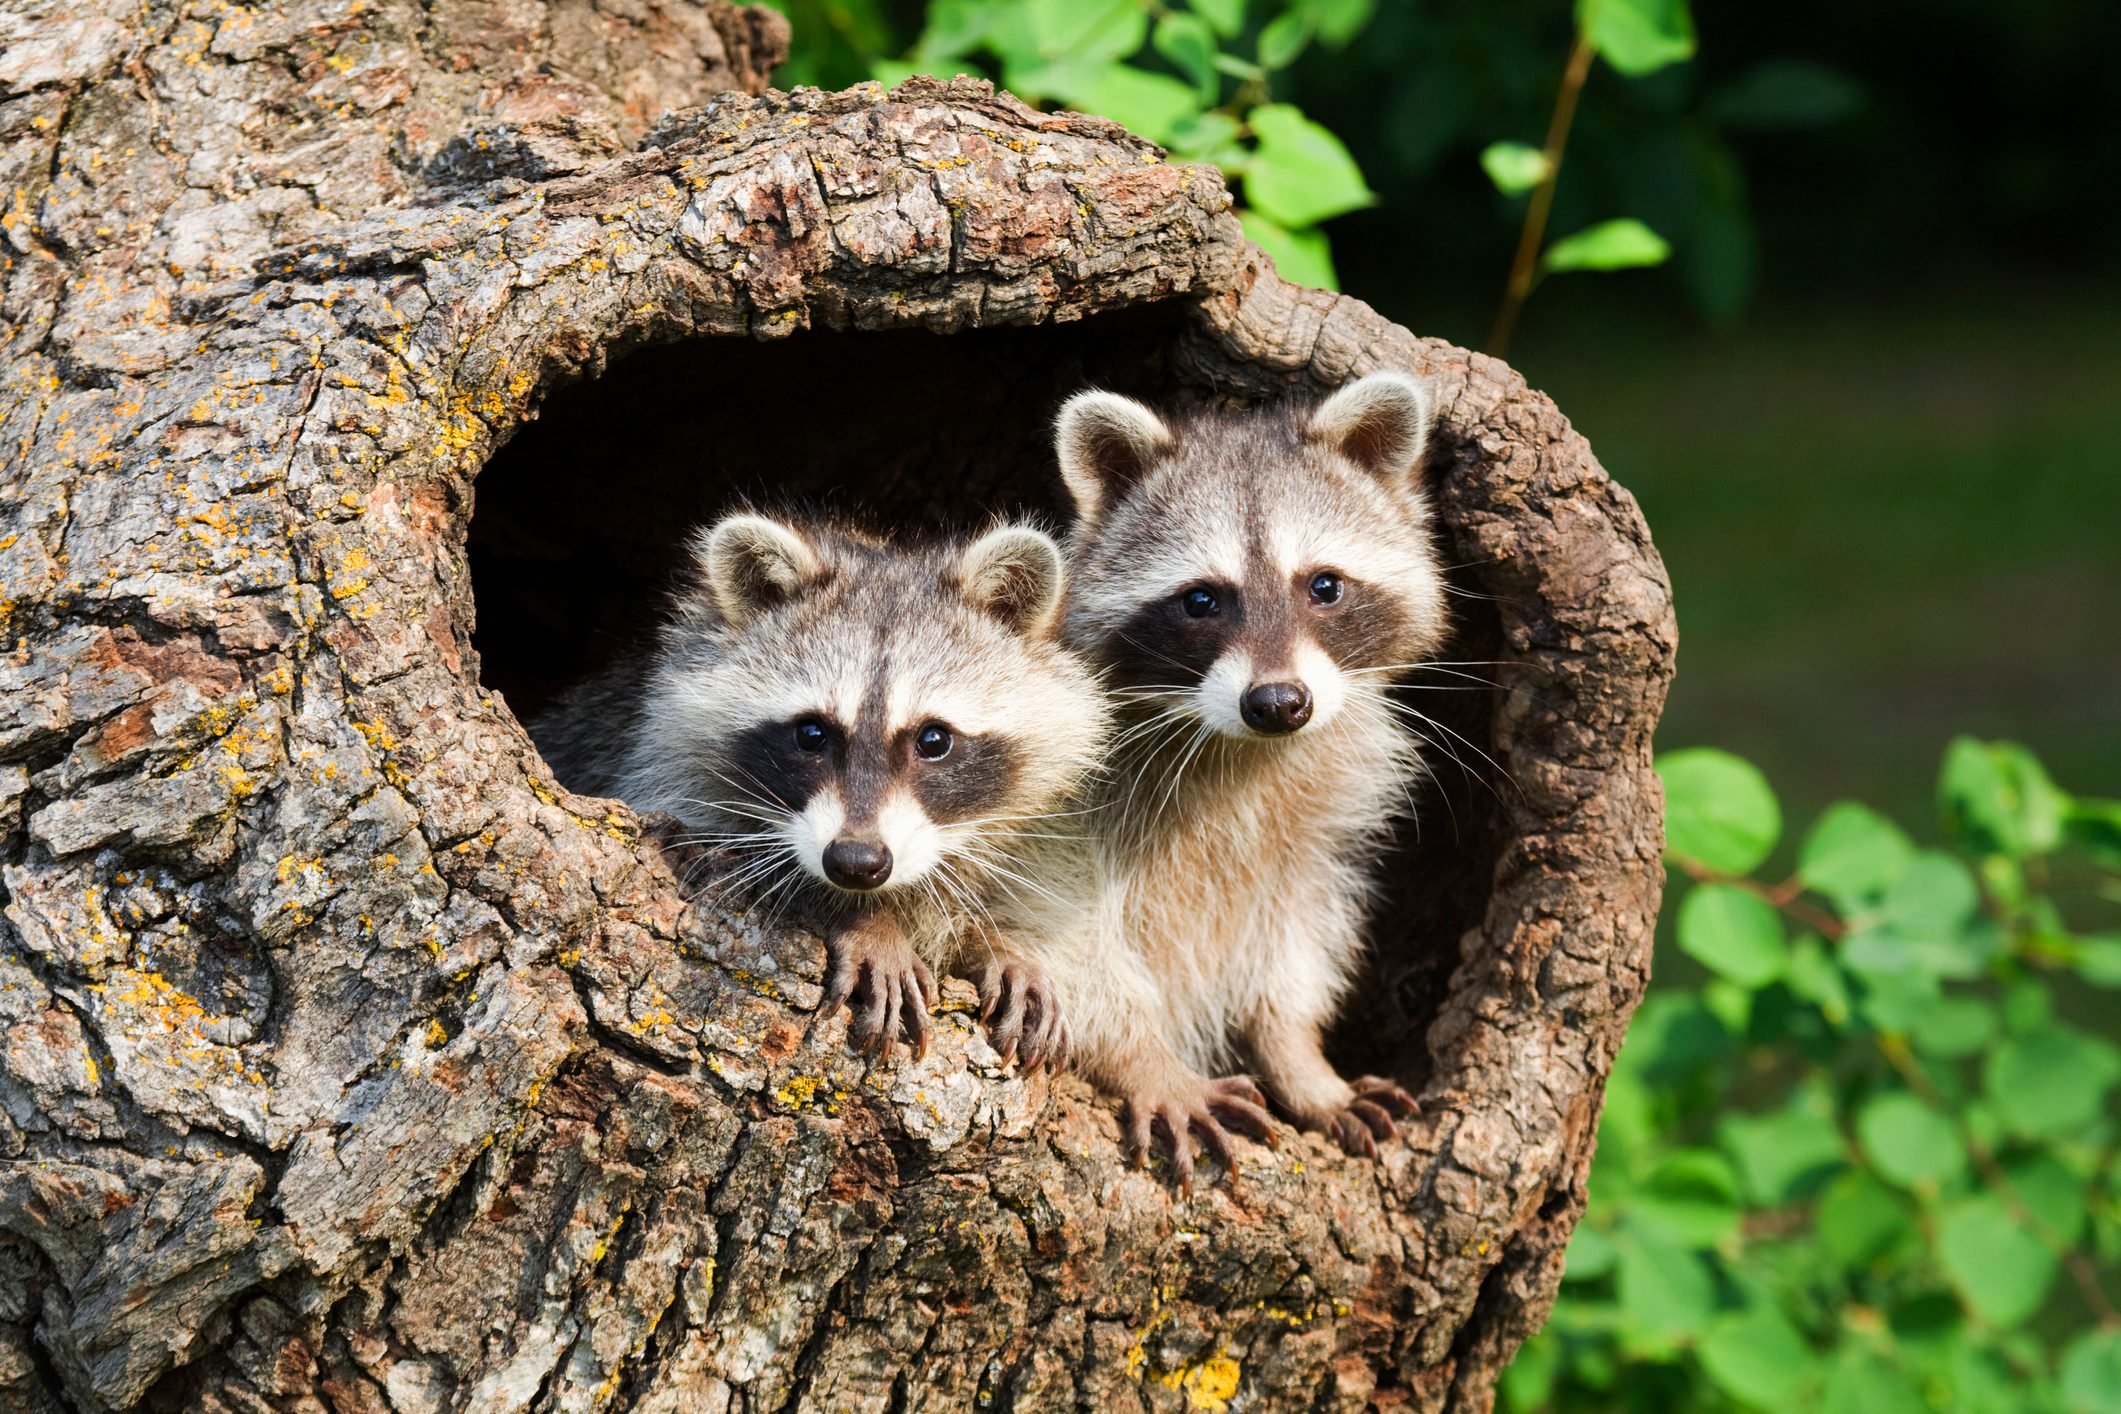 Two Raccoons in a tree hollow